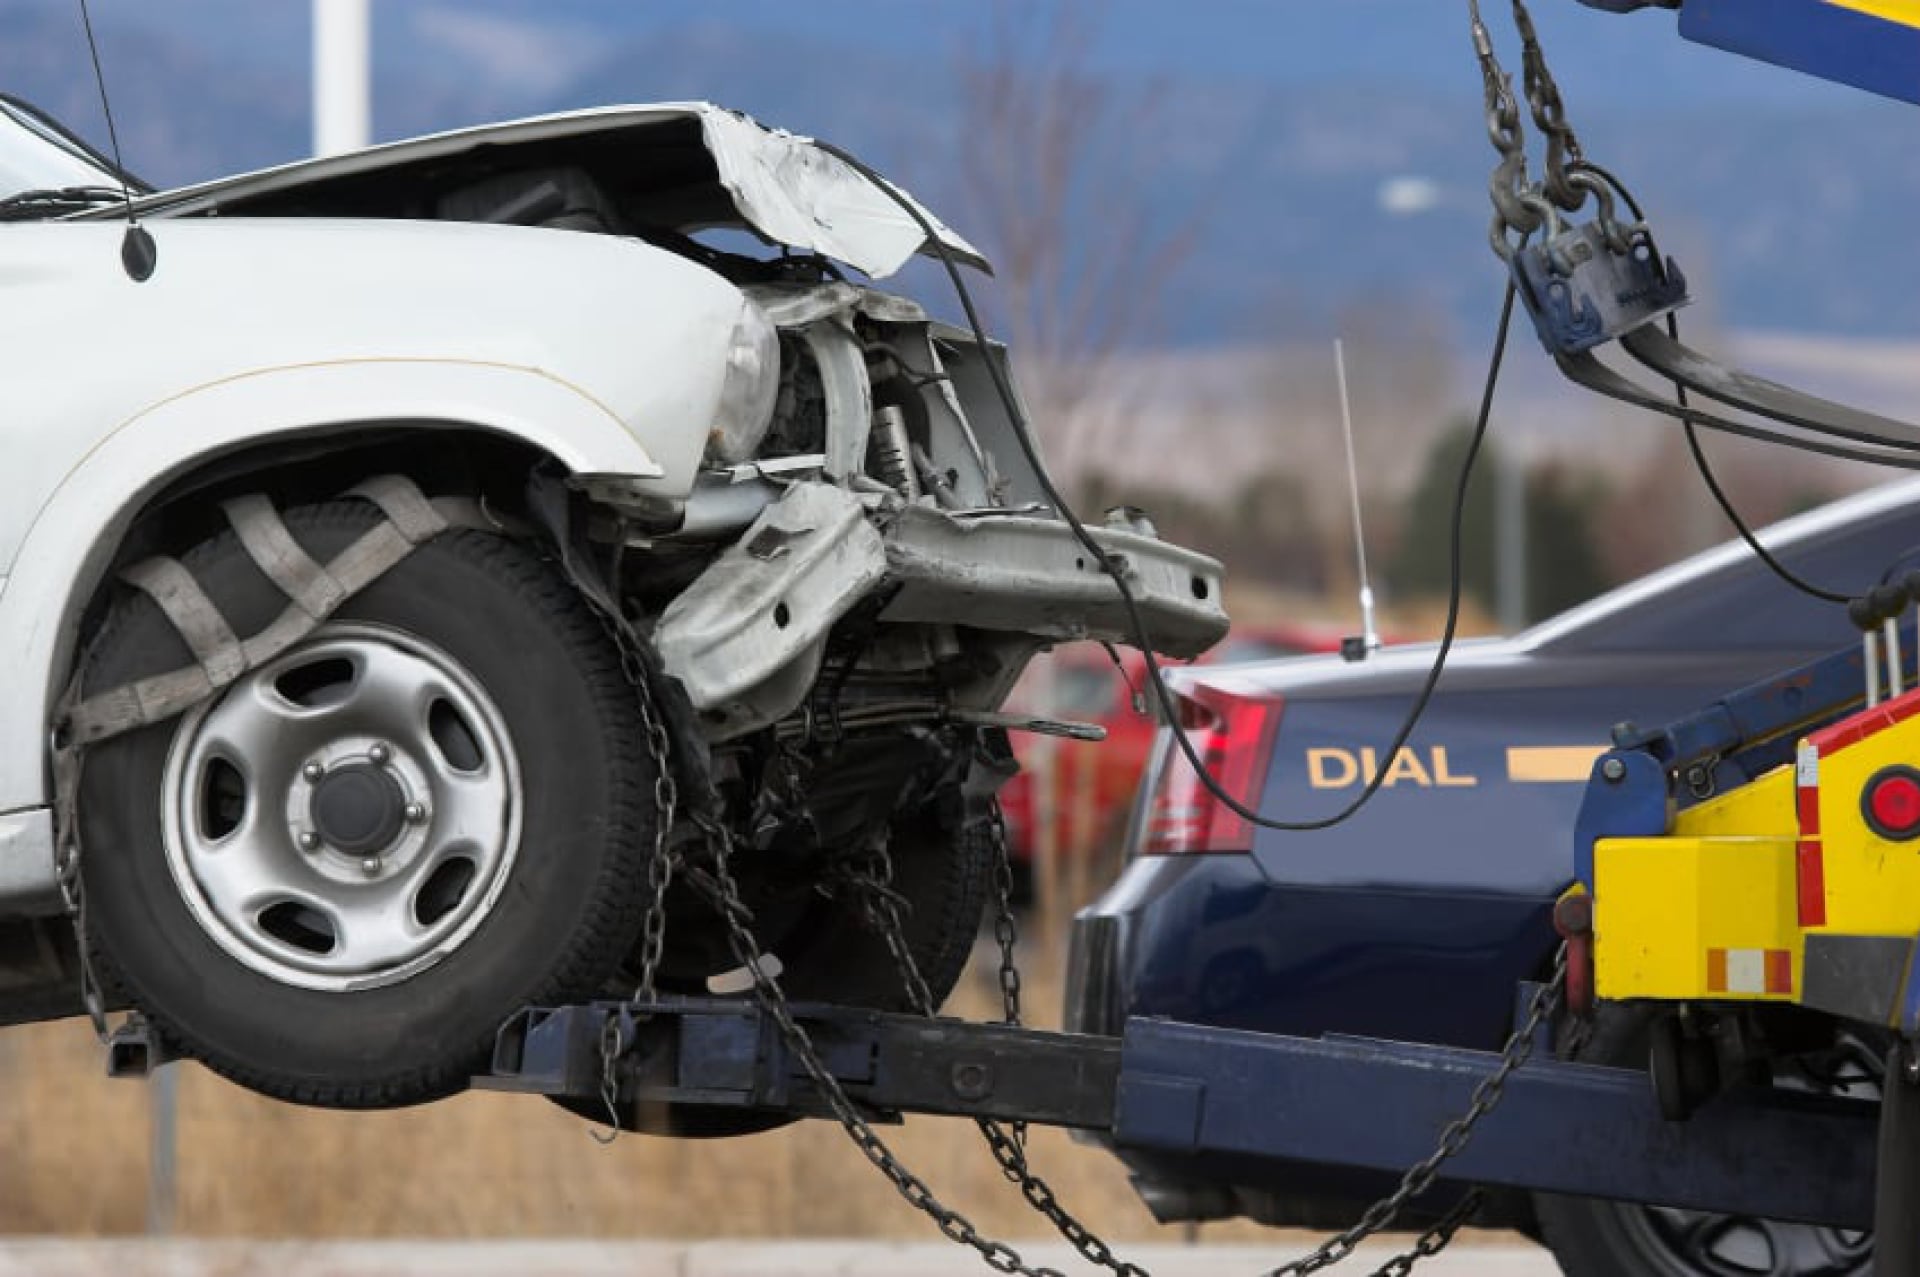 What to Do When Your Car Gets Towed After an Accident